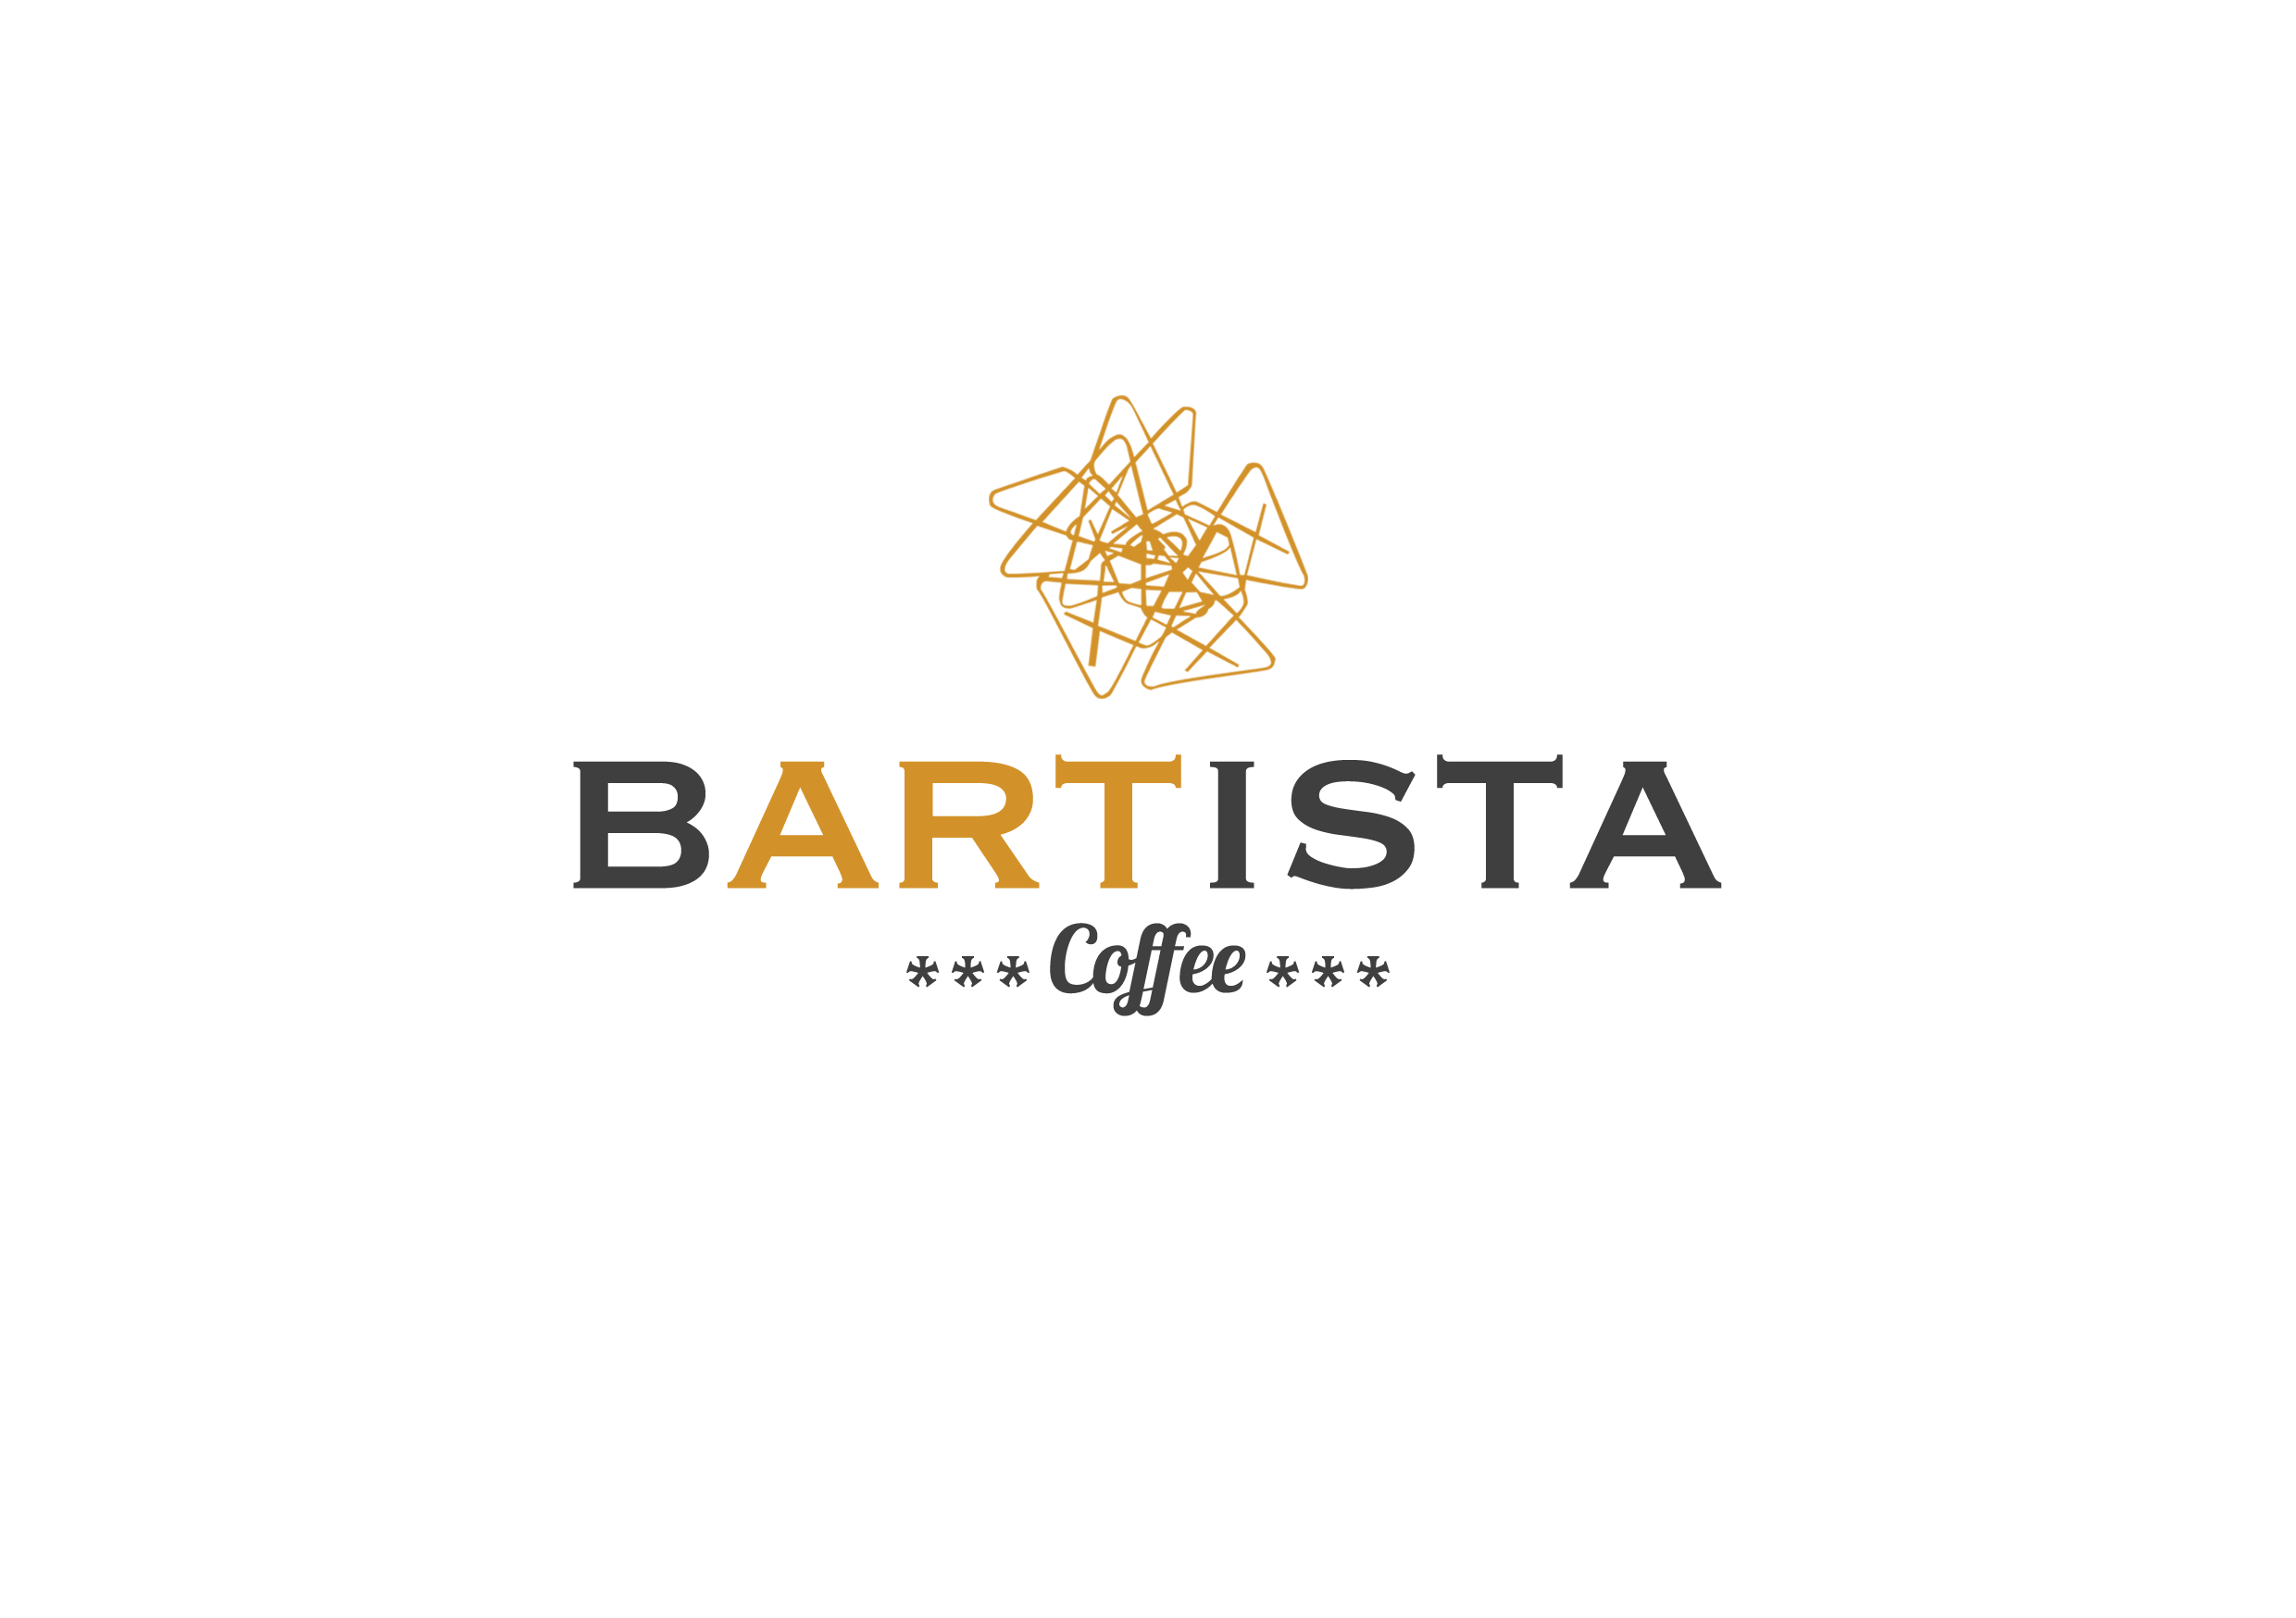 bartista project